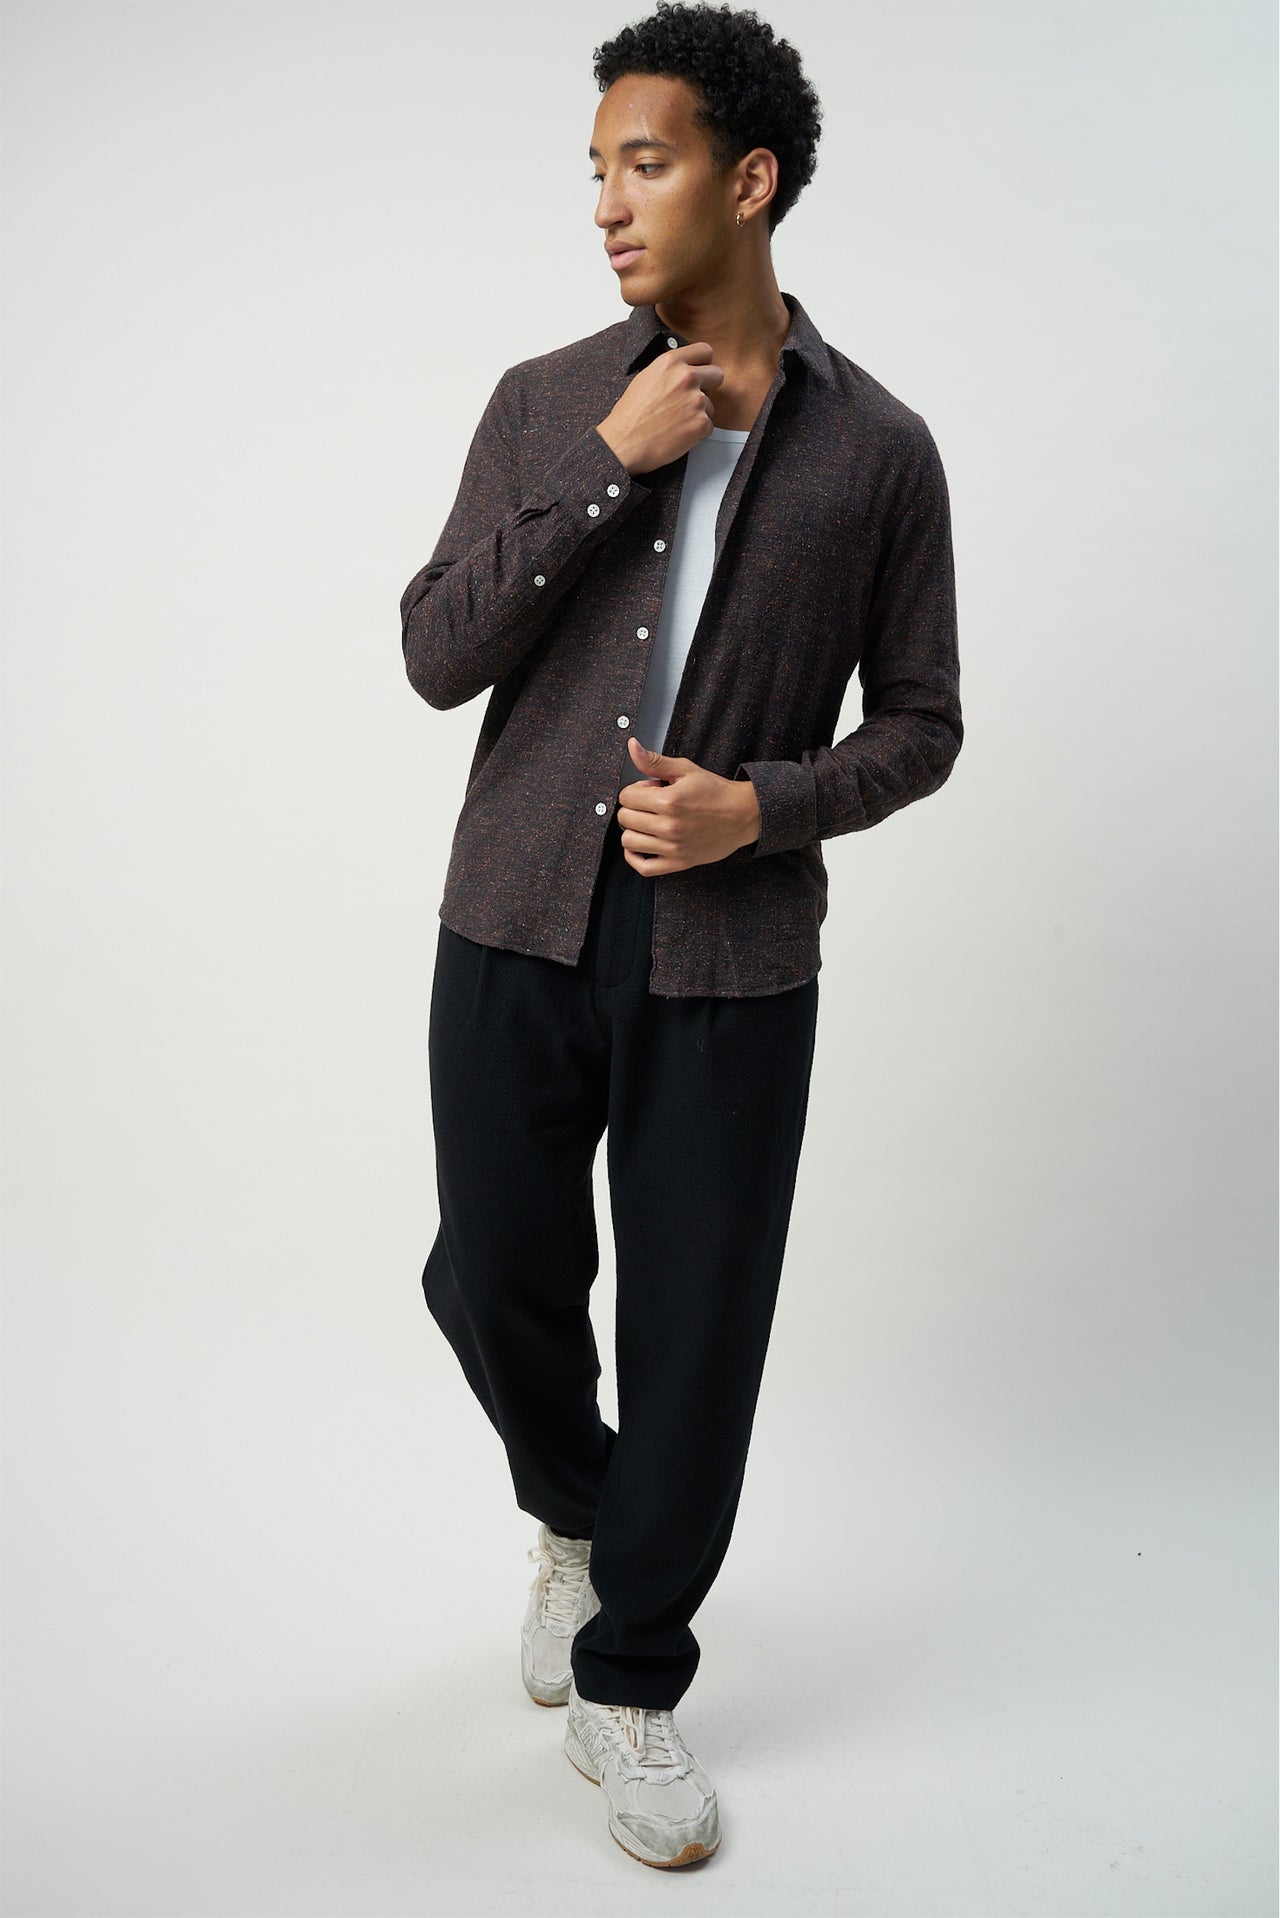 Feel Good Shirt in a Rich Multicolour Orange and Deep Brown Blend of Italian Cotton, Silk and Wool